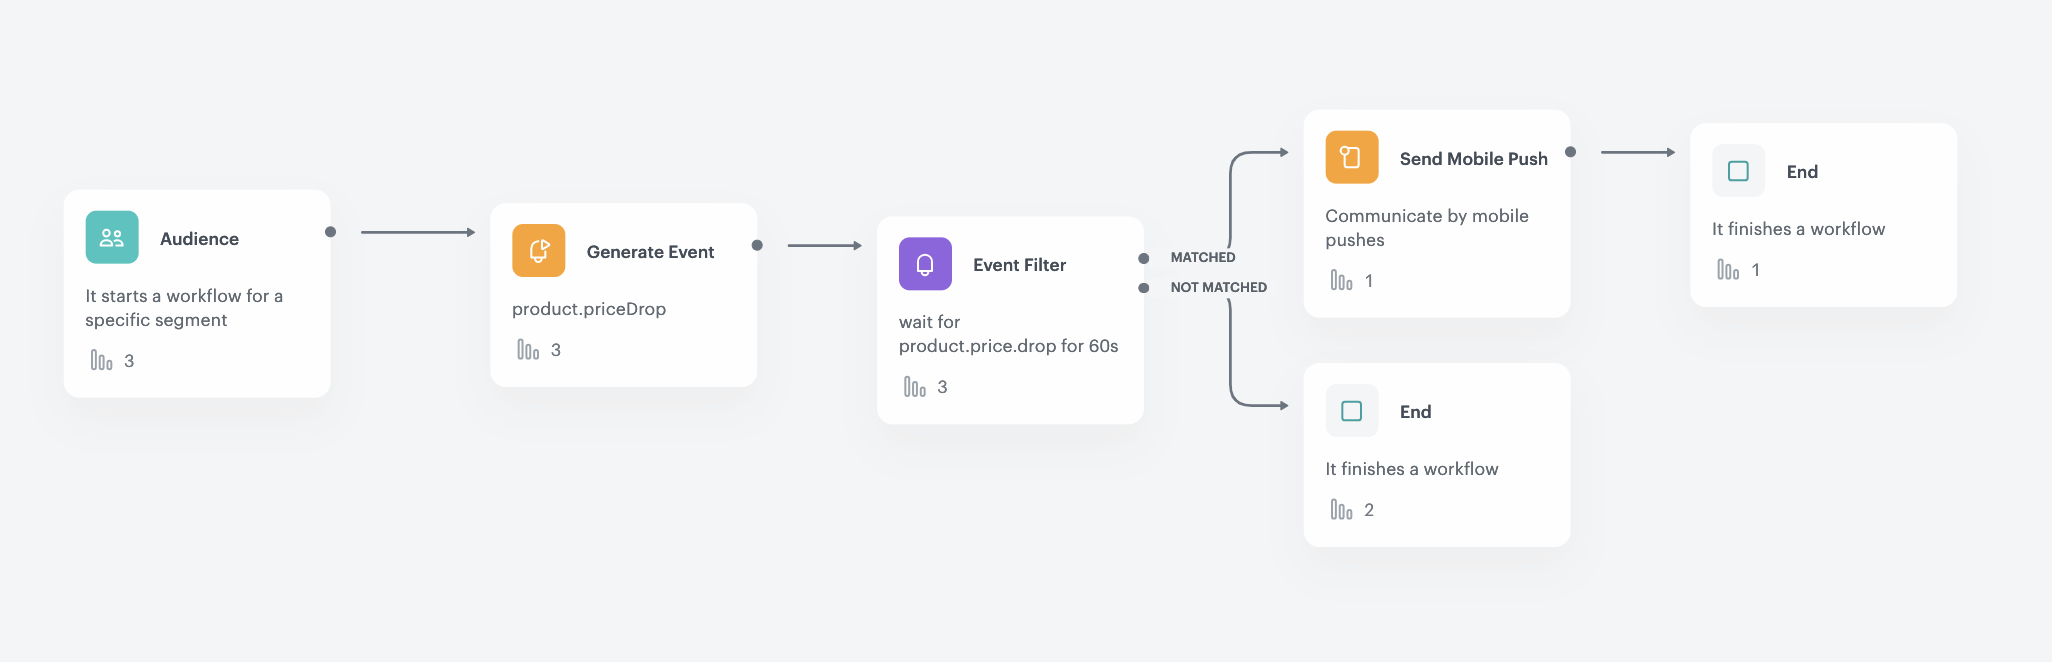 Configuration of the workflow